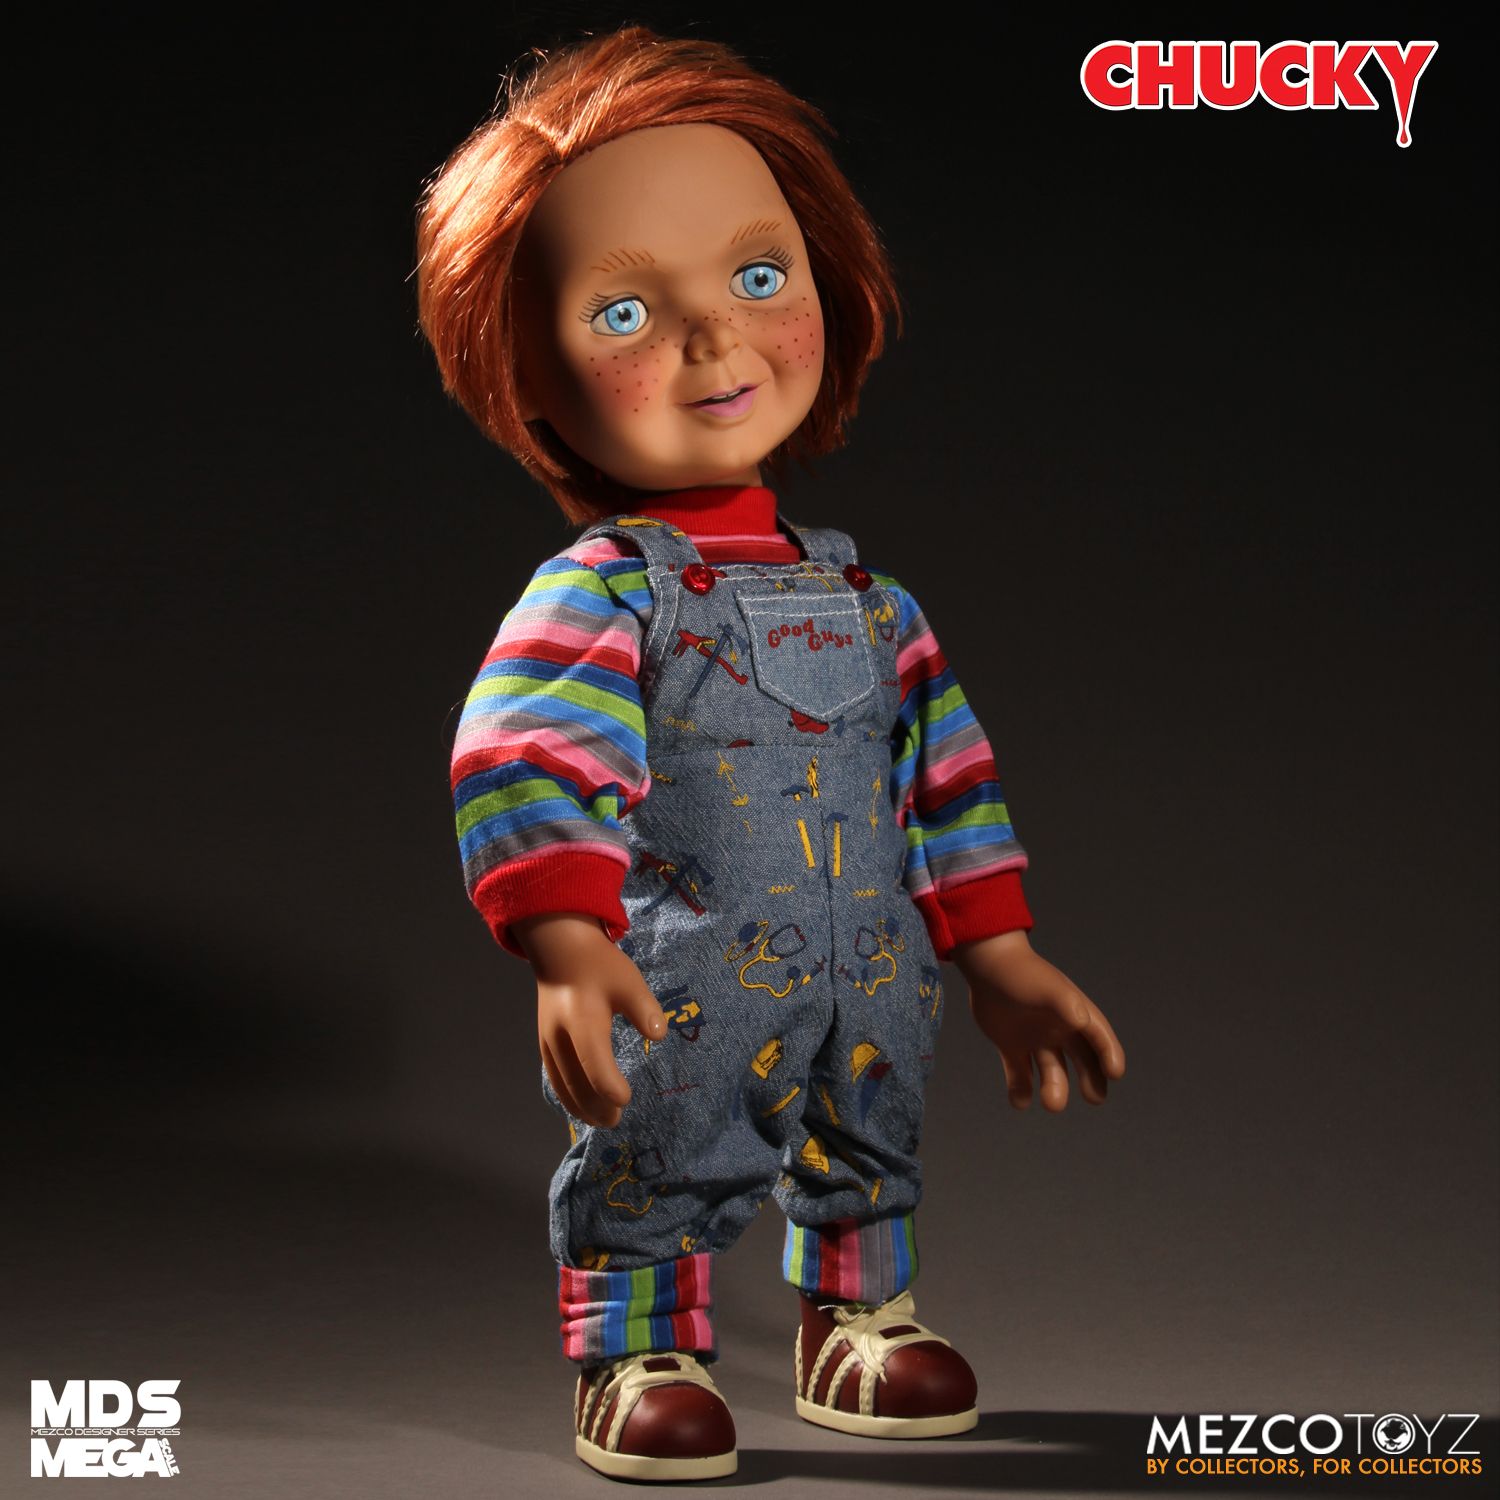 MDS Mega Scale Child's Play: Talking Good Guys Chucky